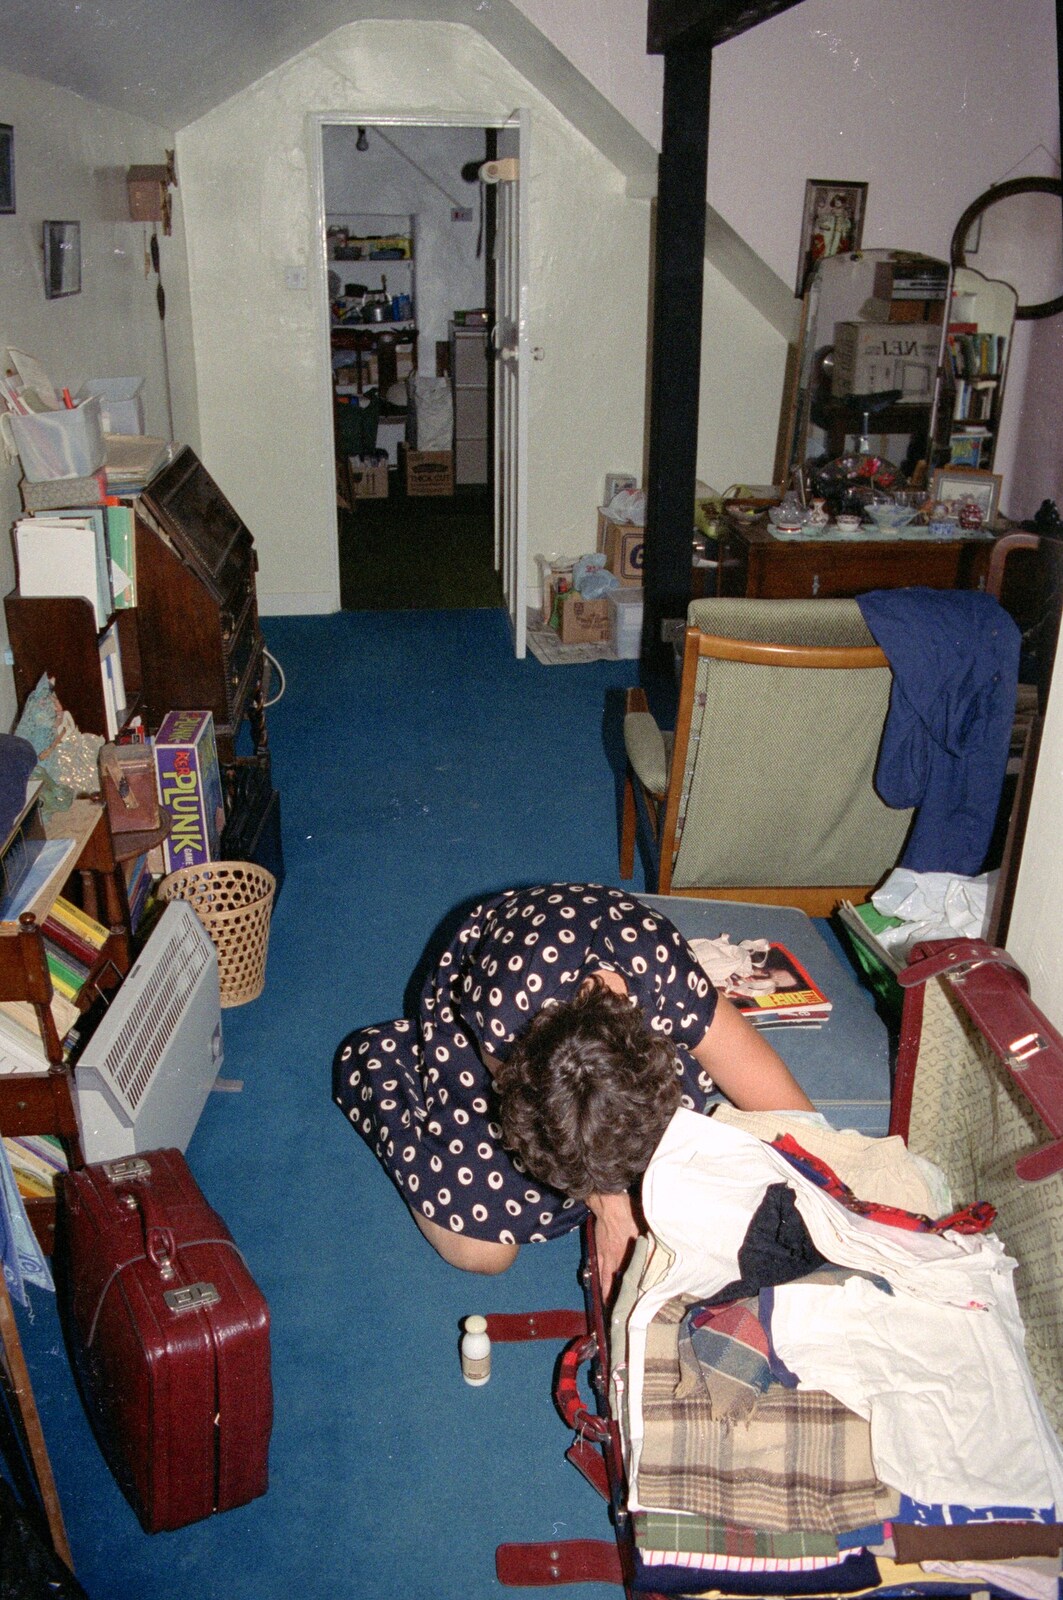 Angela rummages in the basement flat from Uni: A Trip to the Riviera and Oberon Gets New Shoes, Torquay and Harbertonford, Devon - 3rd July 1989